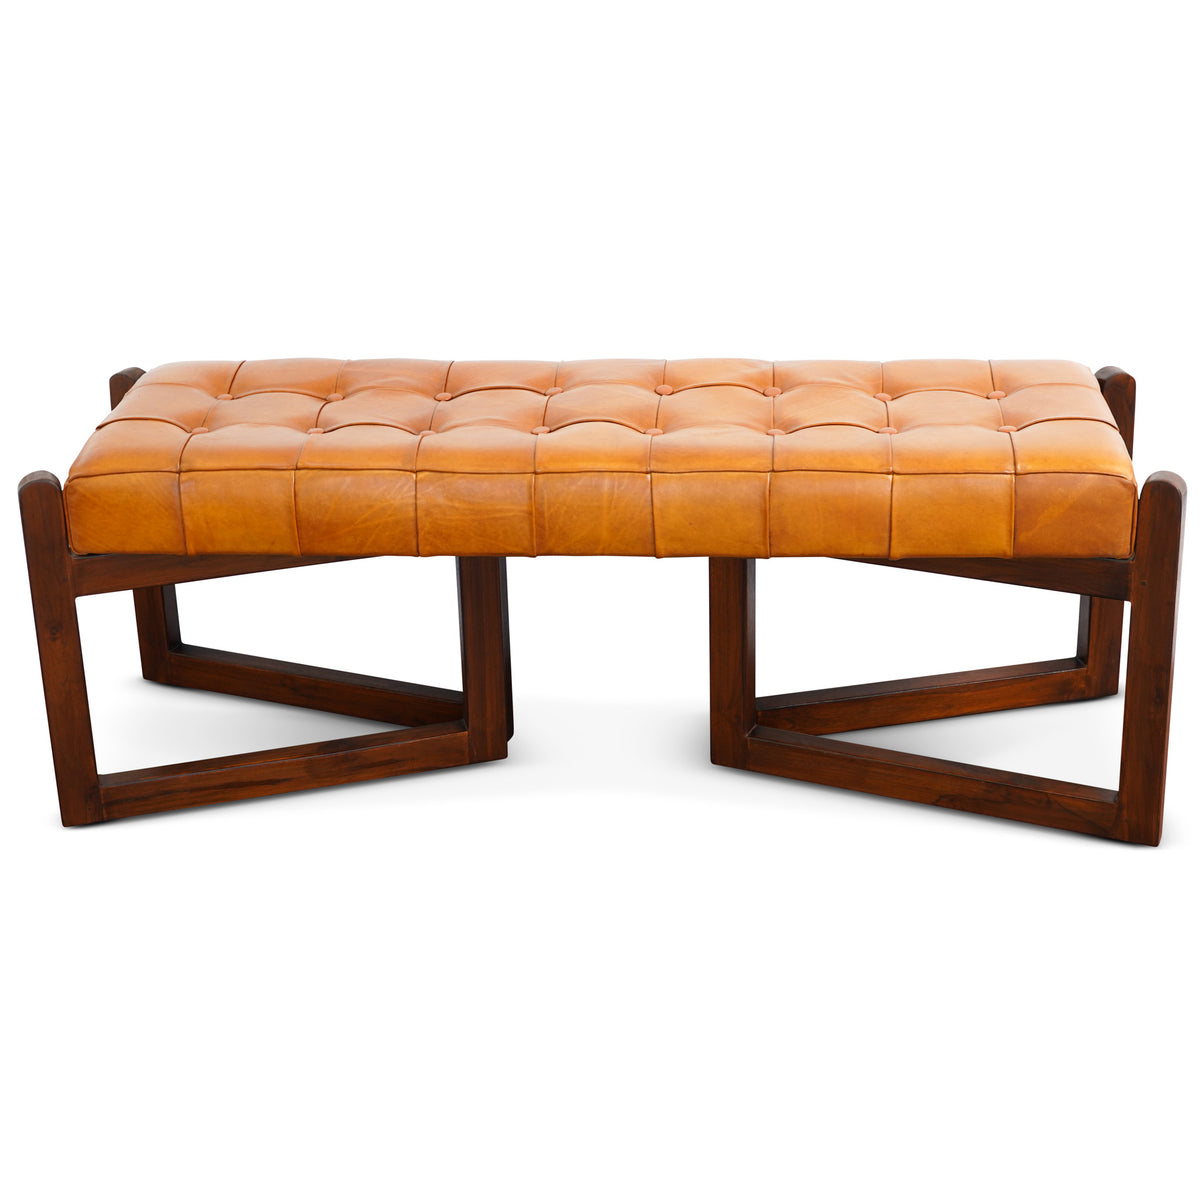 Rosemont Tan Leather Bench